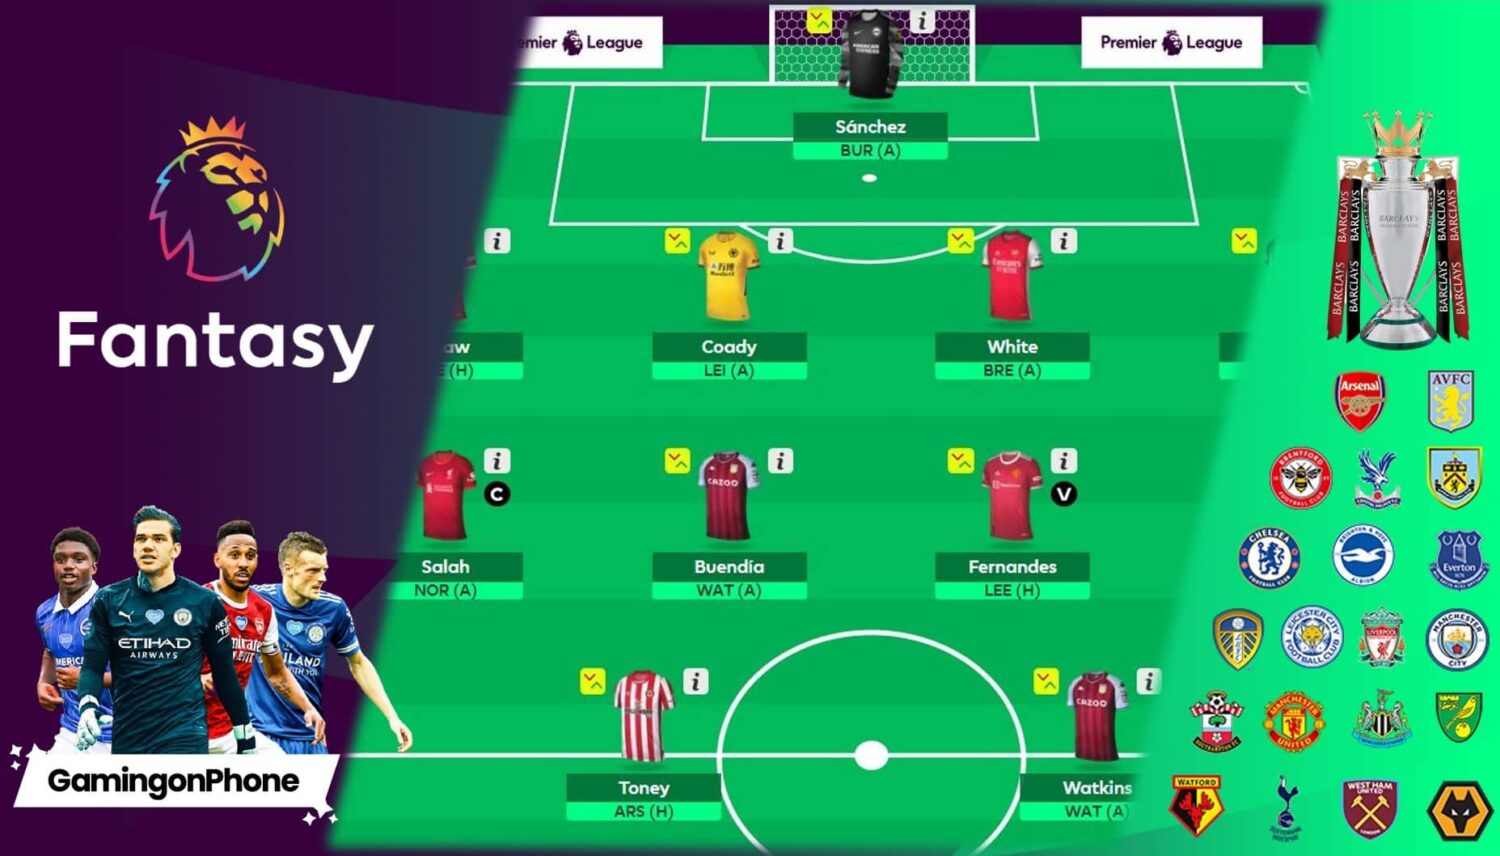 FPL 2021/22: List of 50 best and funny Fantasy team names you can choose